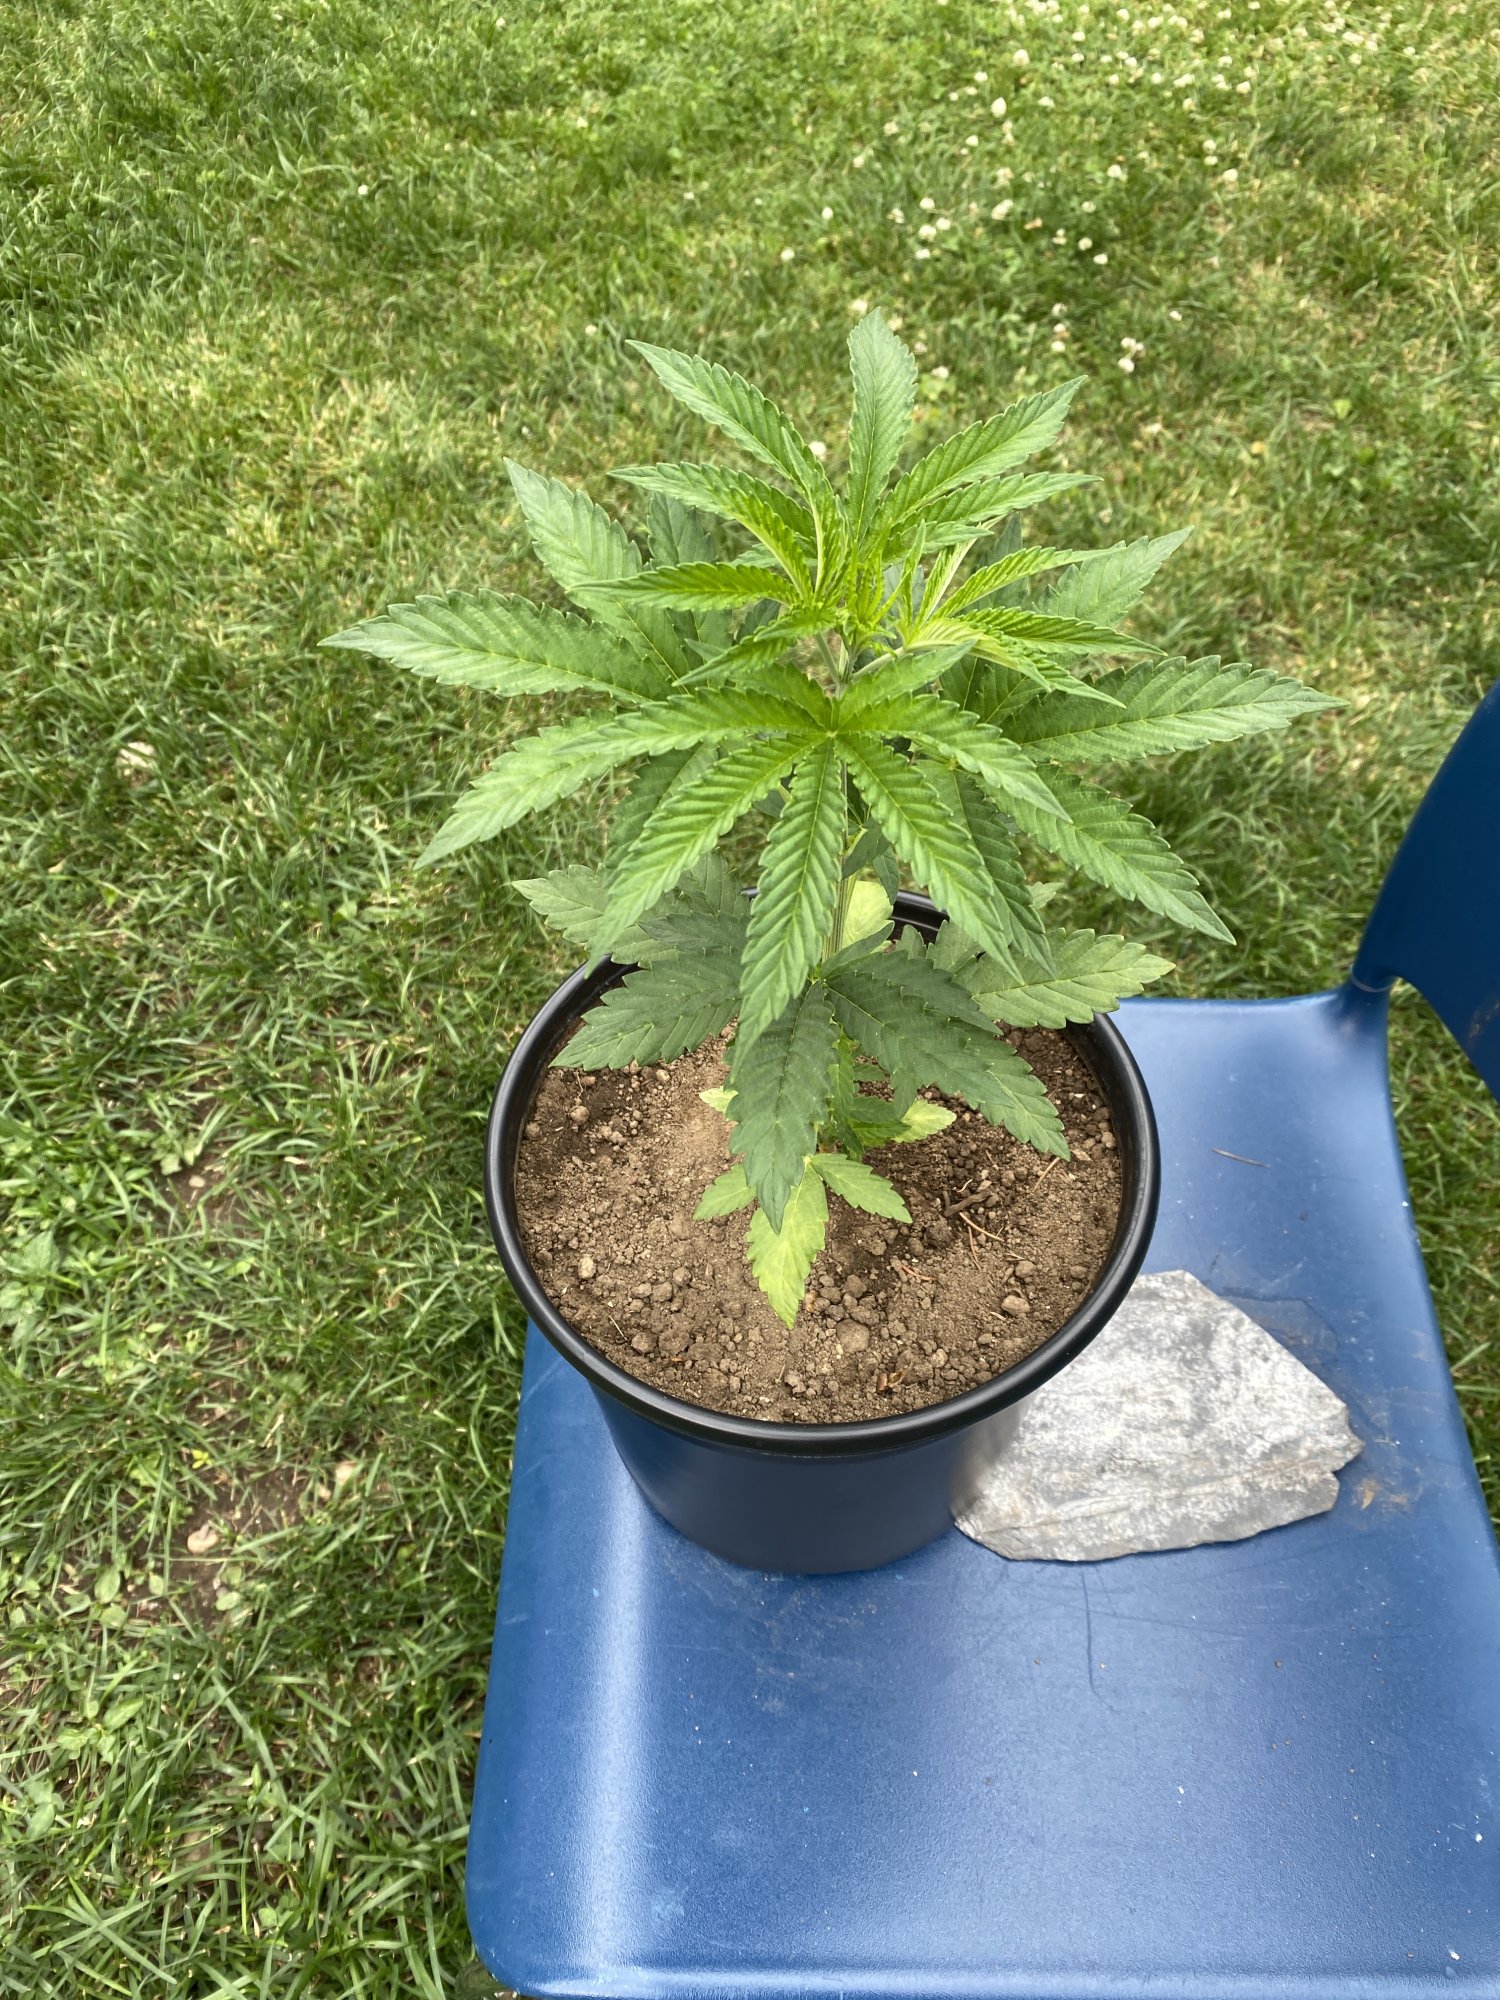 First time grower noticed the leaves on the bottom started turning greenish yellowish 3